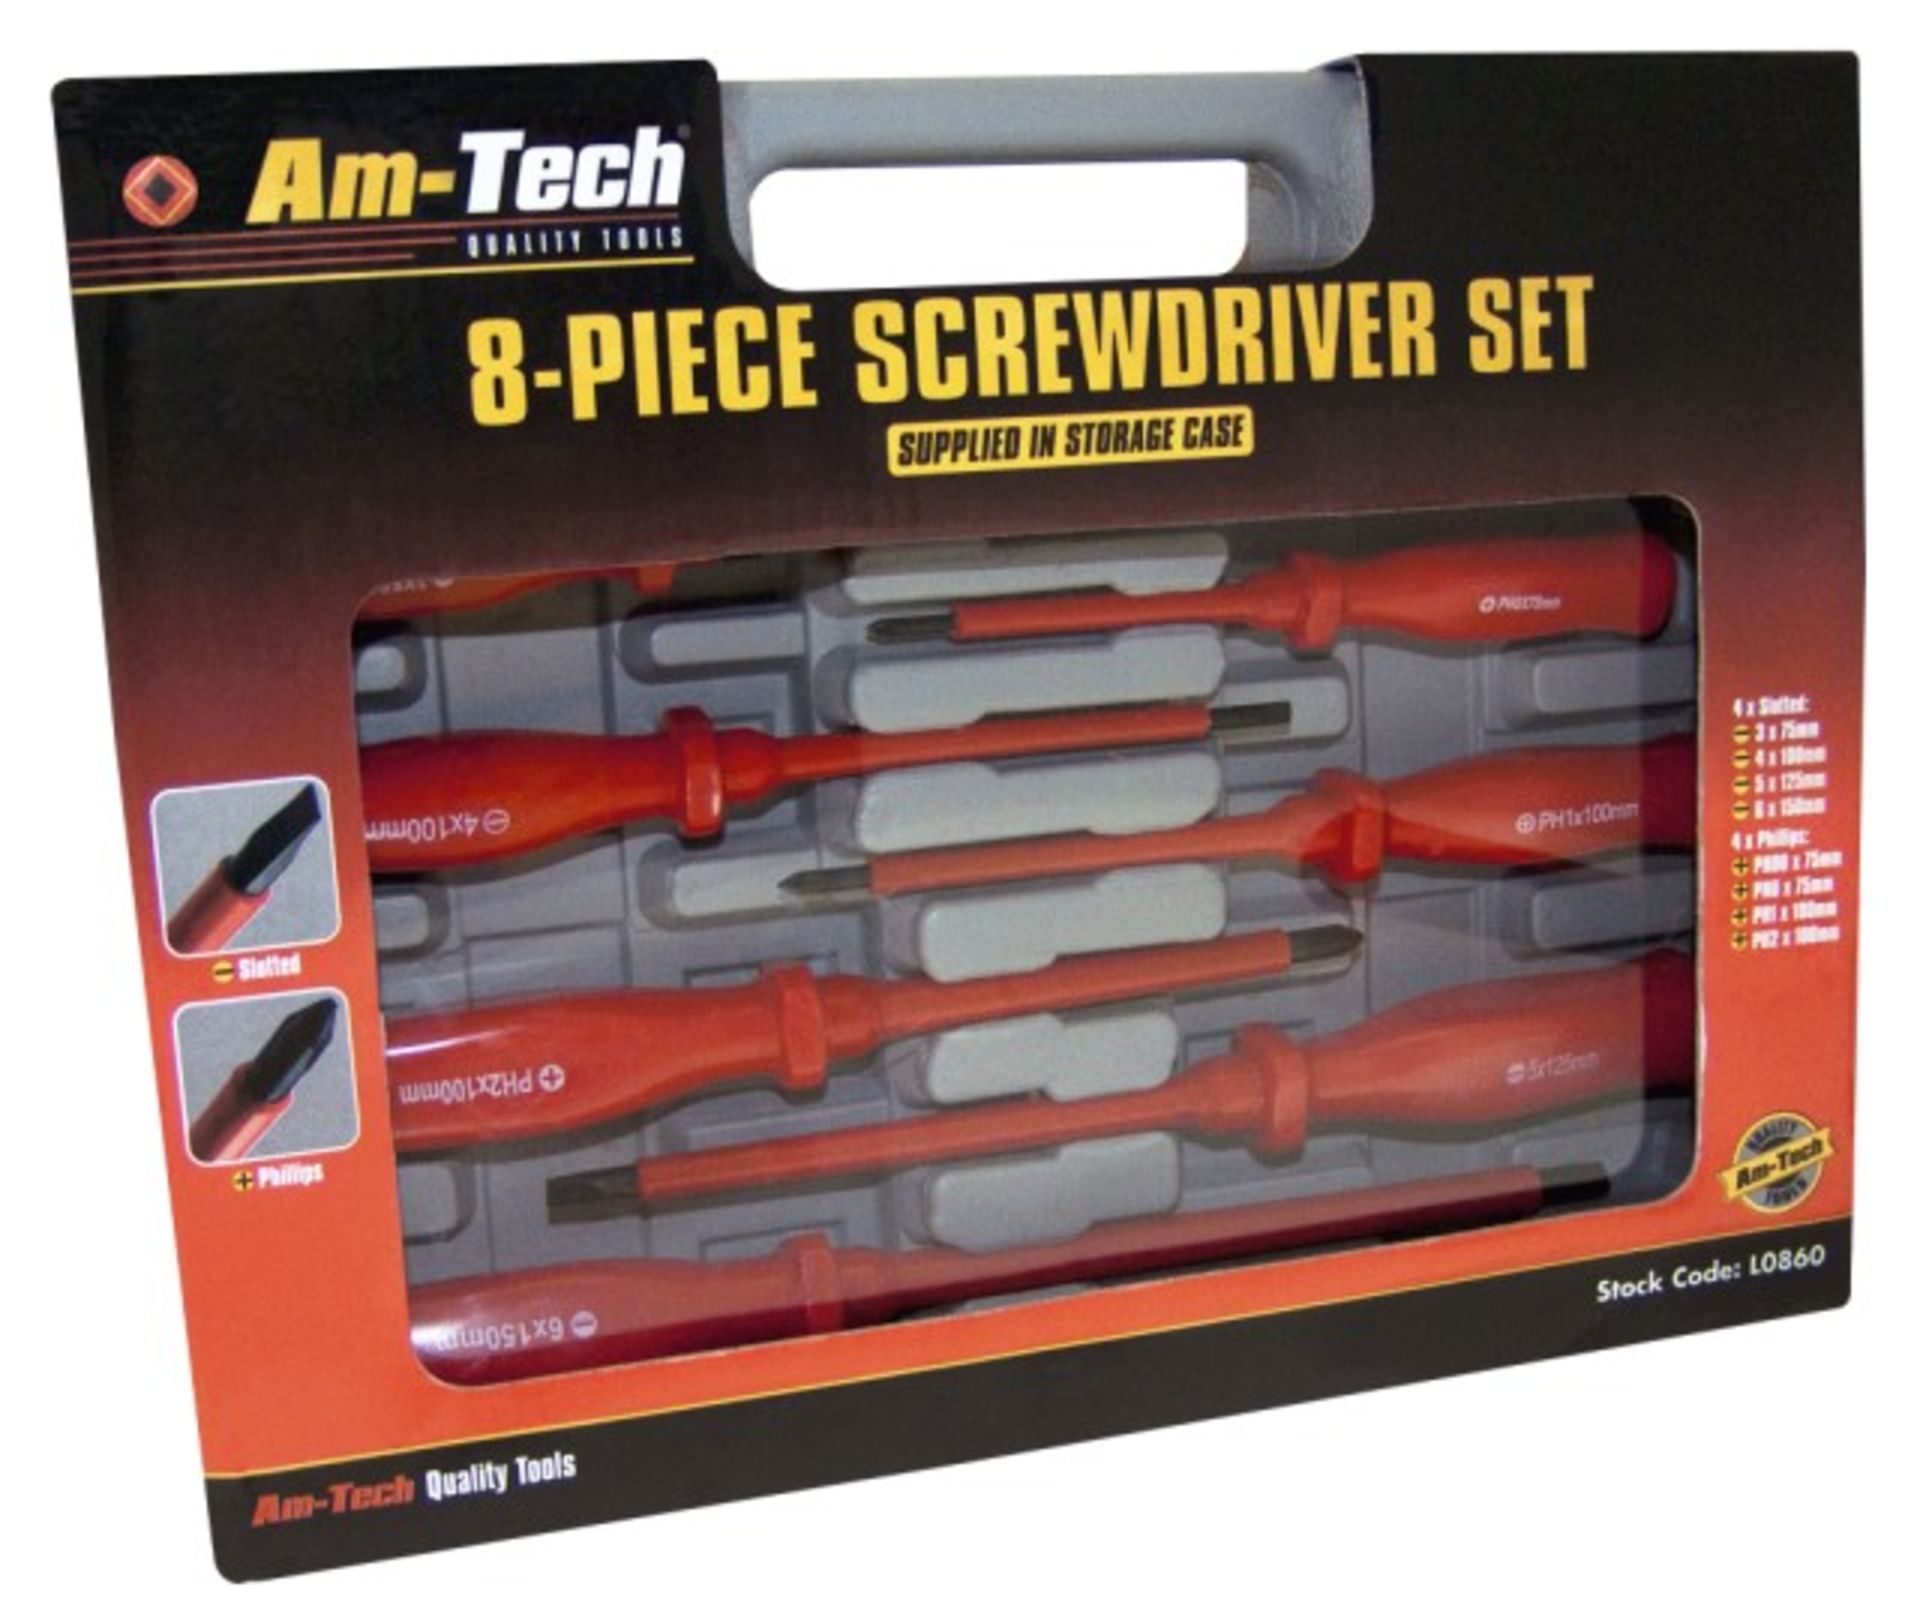 V *TRADE QTY* Brand New Eight Piece Screwdriver Set In Carry ase X 3 YOUR BID PRICE TO BE MULTIPLIED